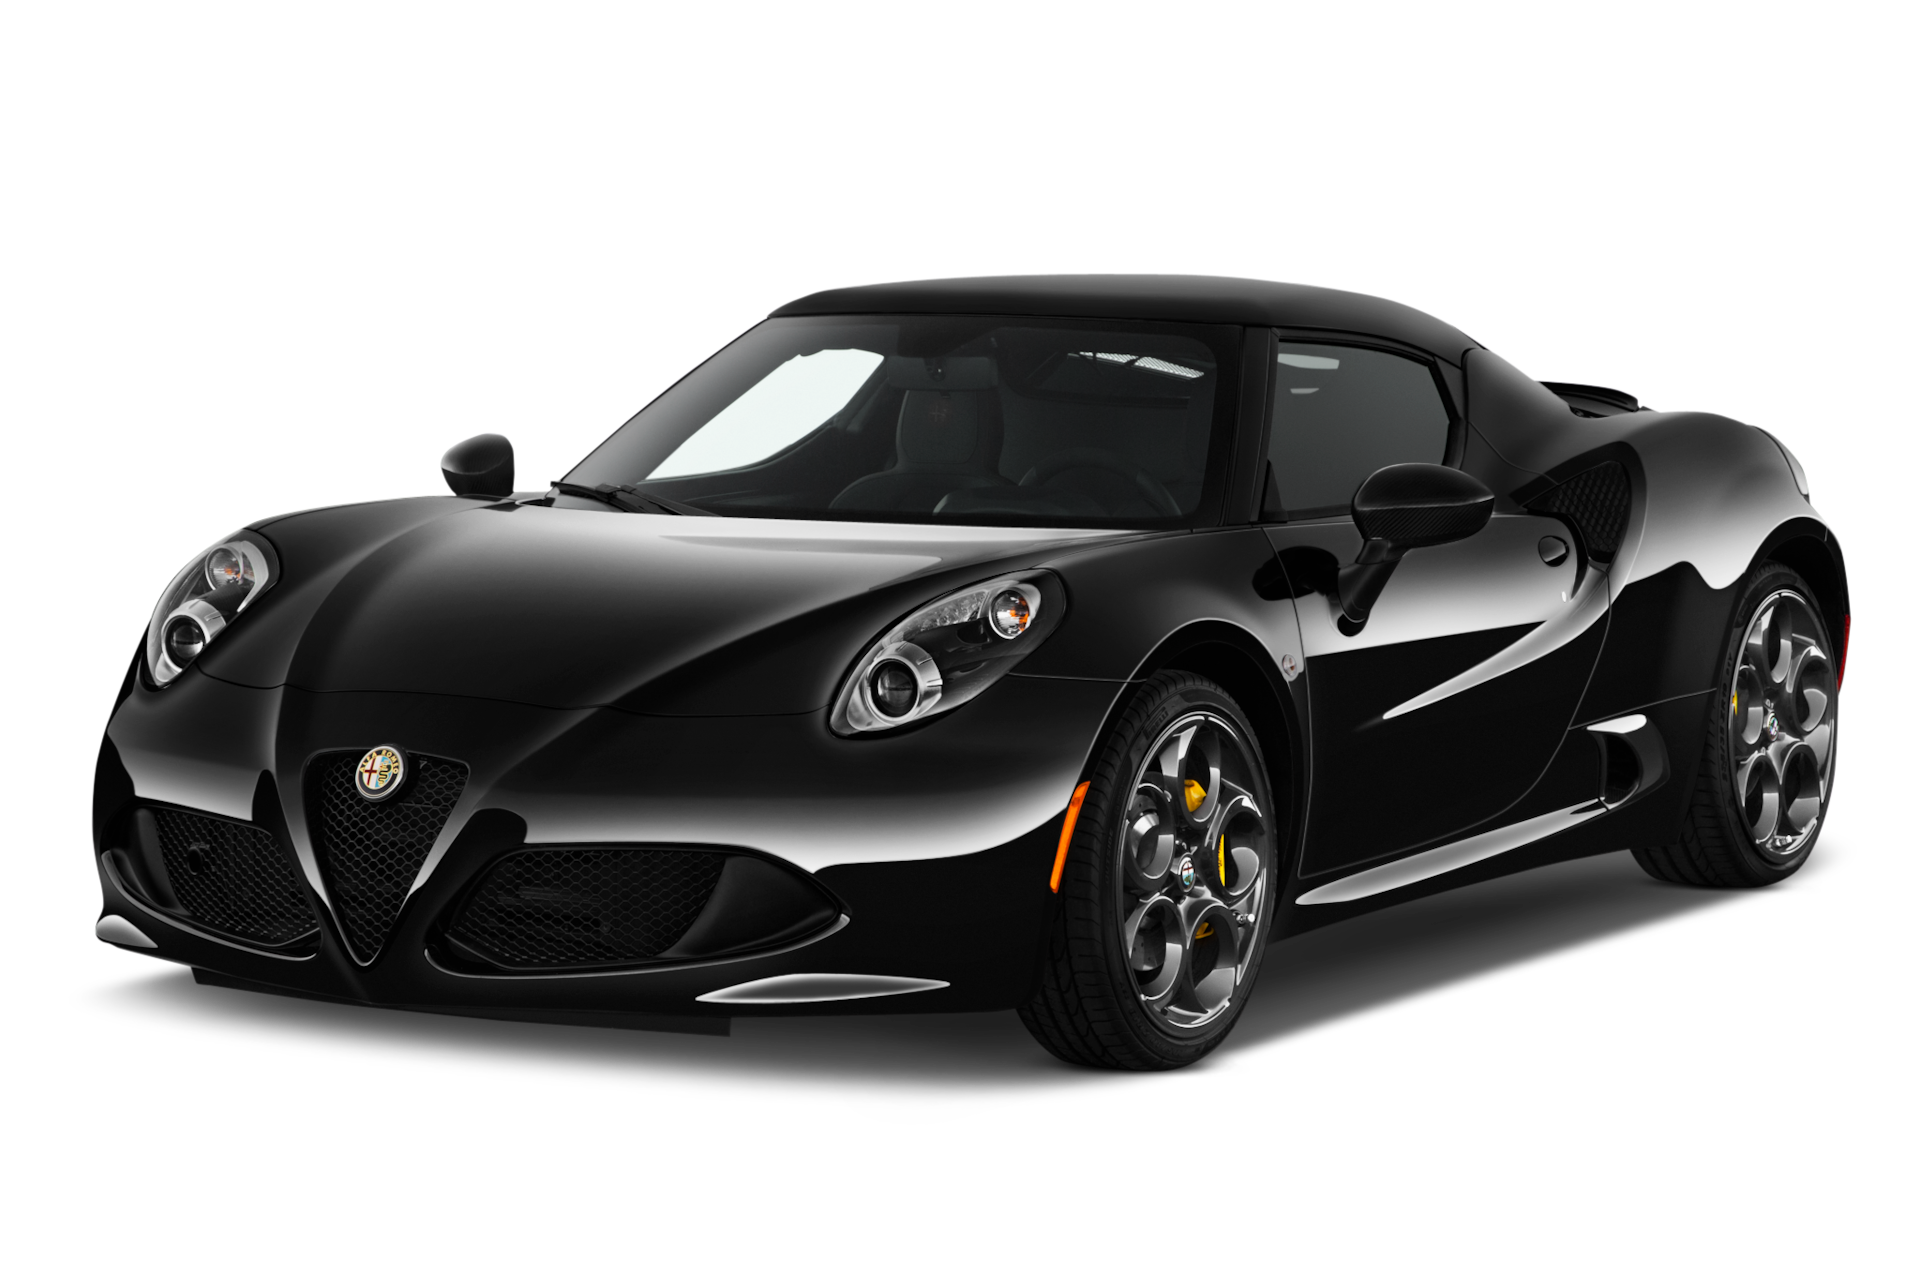 2015 Alfa Romeo 4C Prices, Reviews, and Photos - MotorTrend